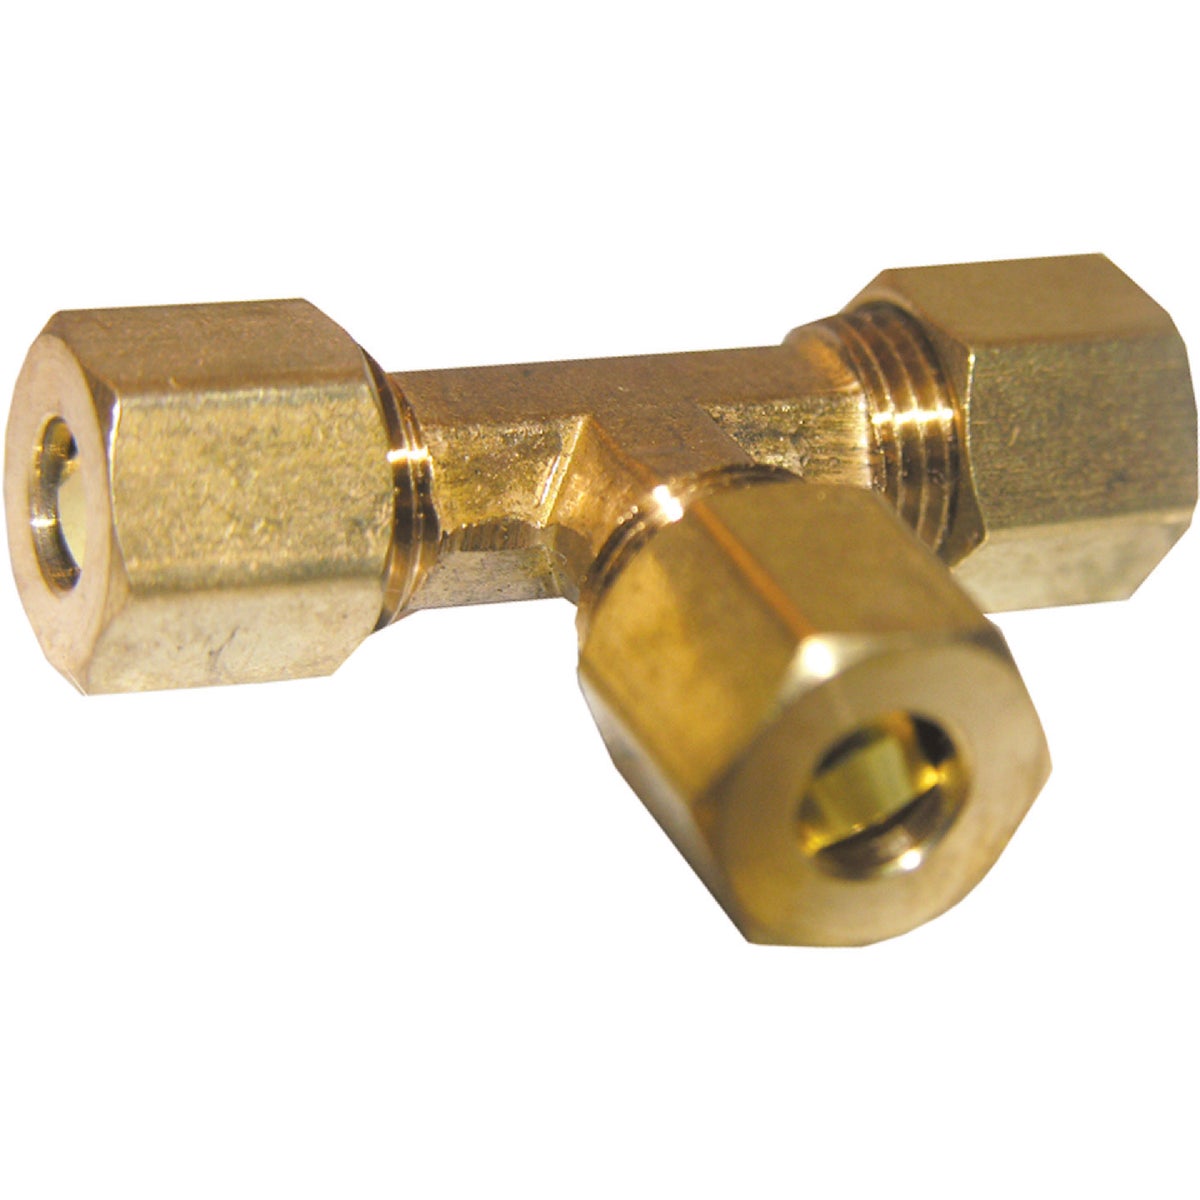 Lasco 3/8 In. x 3/8 In. x 1/4 In. Compression Brass Tee